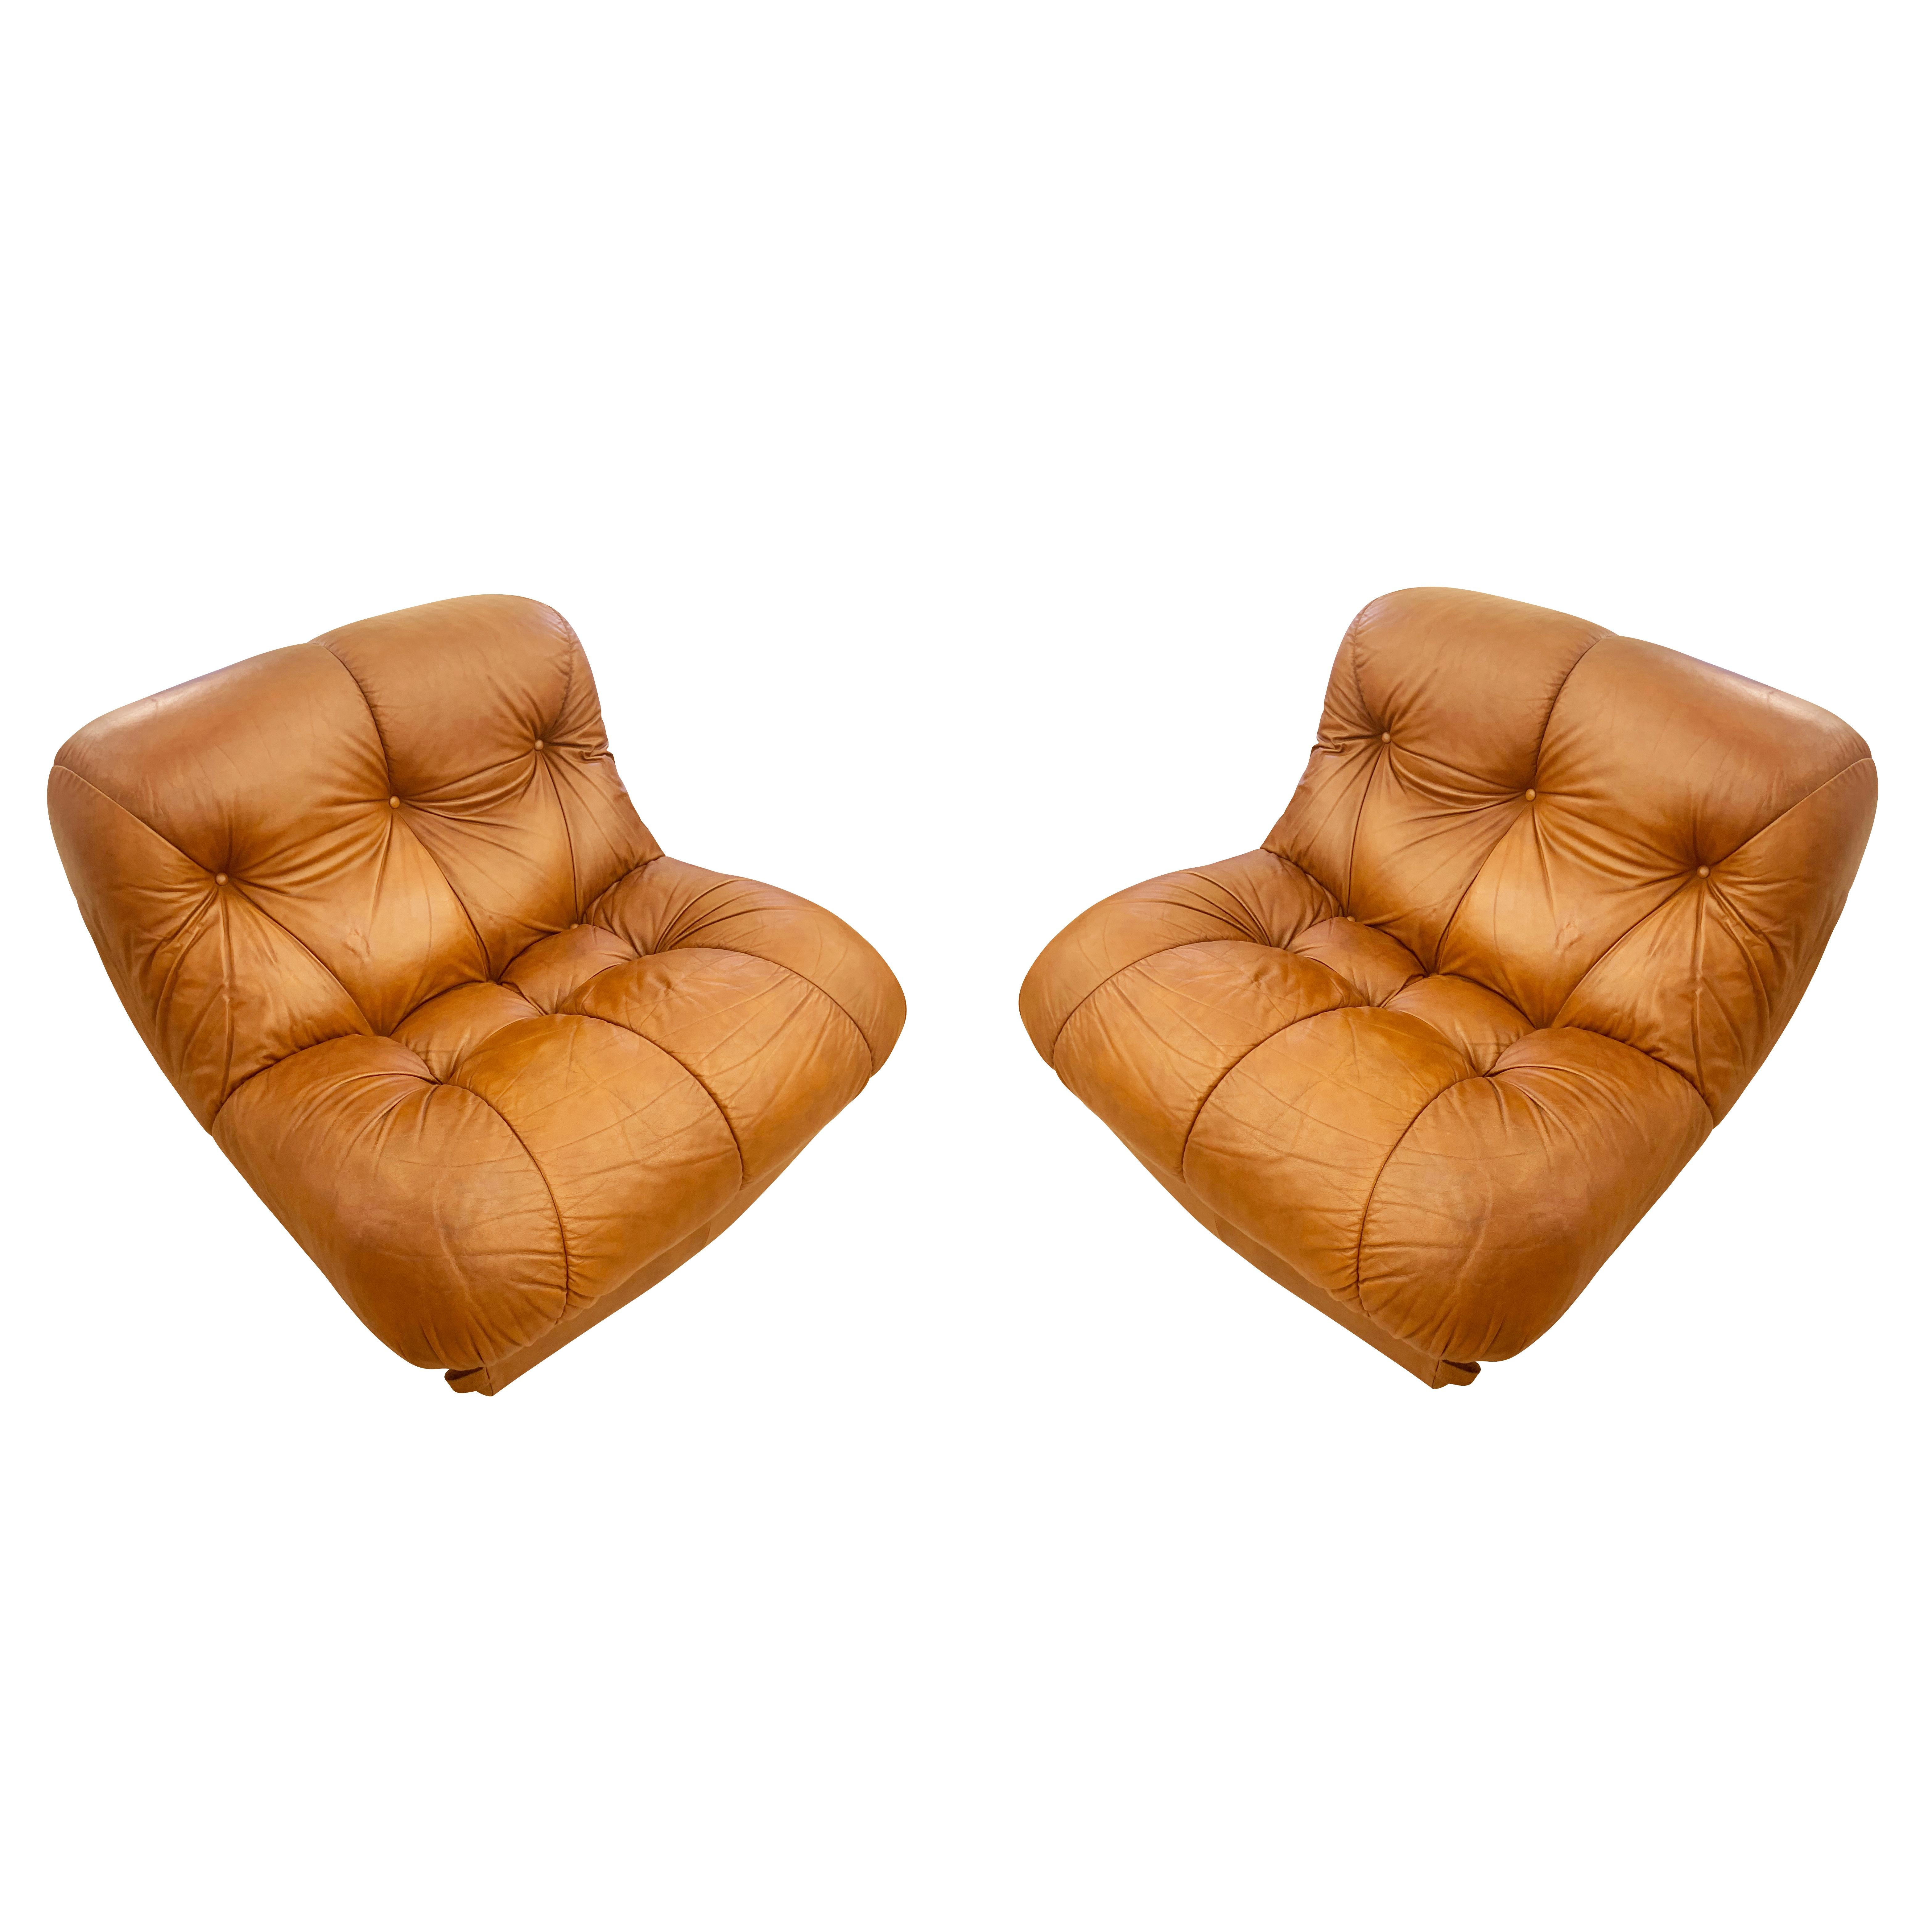 Pair of Italian Mid-Century lounge chairs with their original leather. Can be sold individually on request.

Condition: Good original condition, wear consistent with age and use.

Width: 35”

Depth: 36”

Height: 27”

Seat Height:  15”